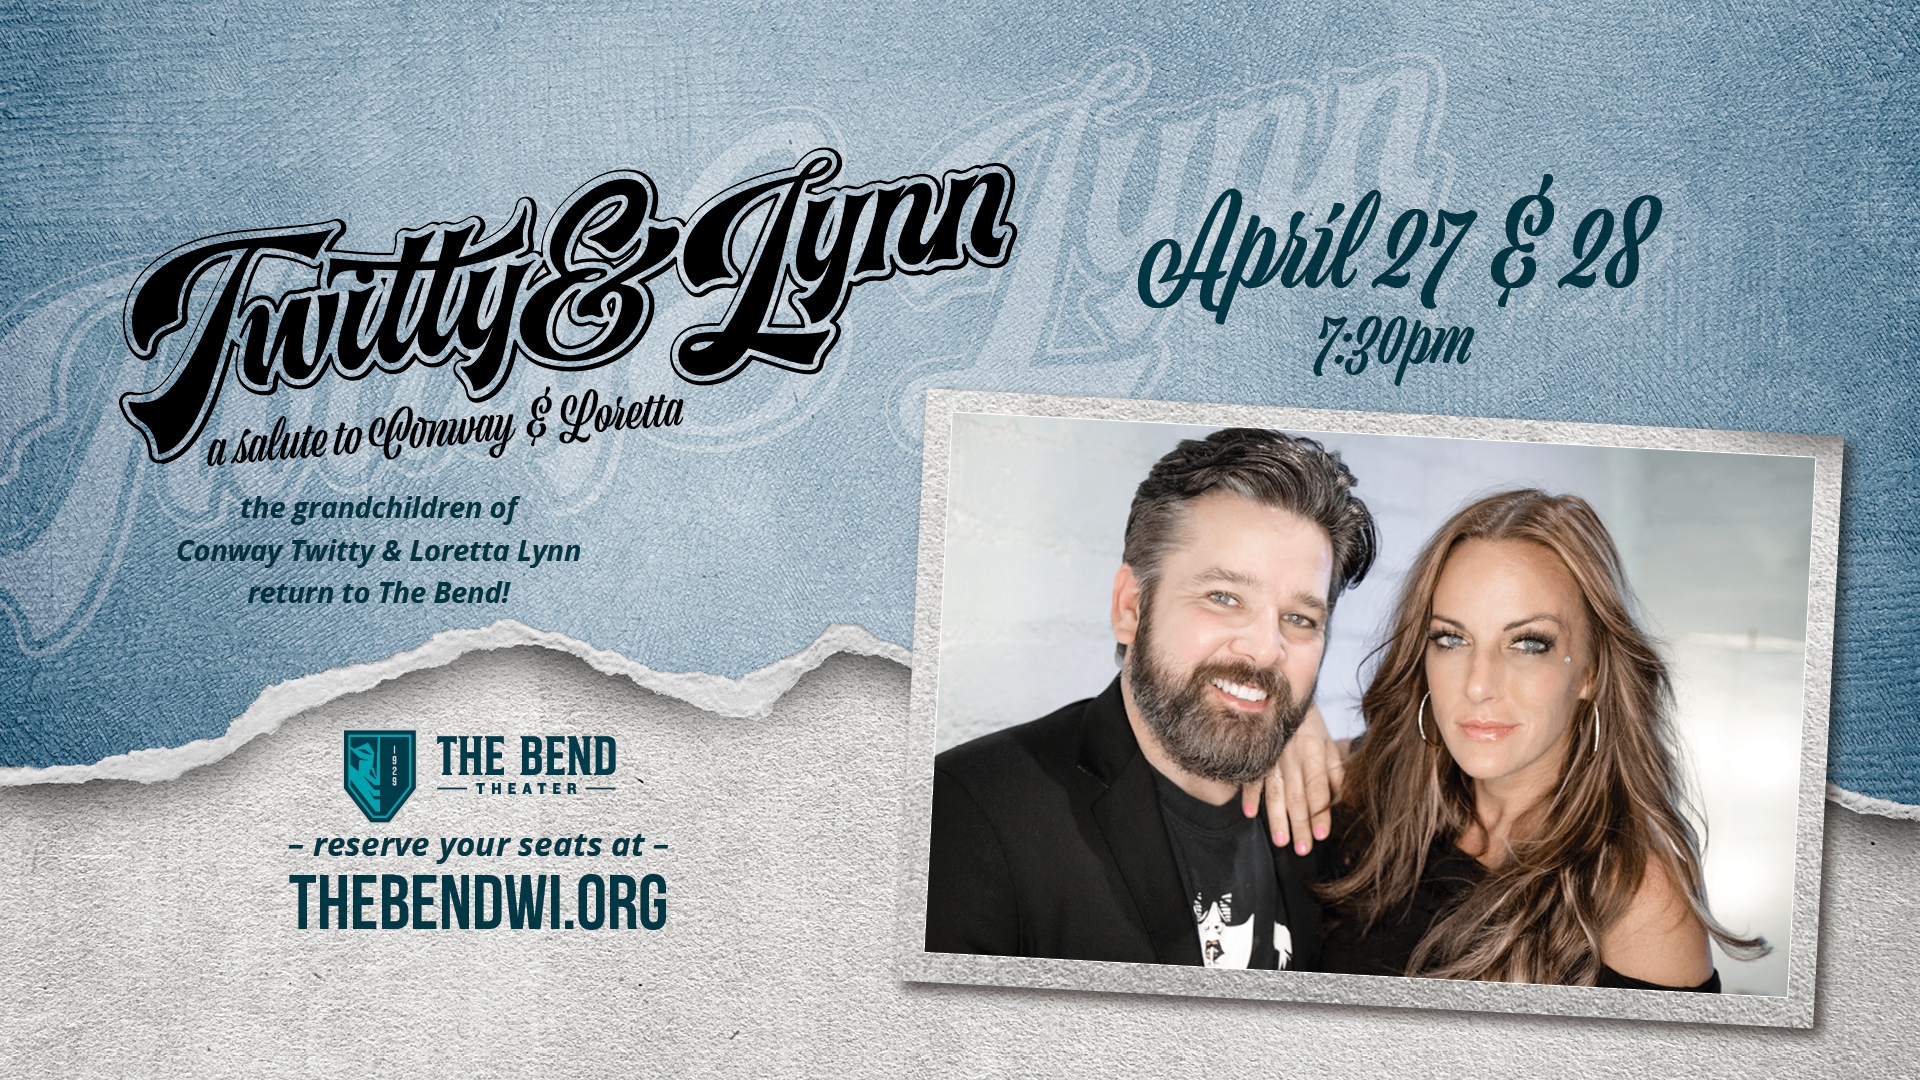 Twitty & Lynn - A Salute to Conway & Loretta - Live Music at The Bend Theater